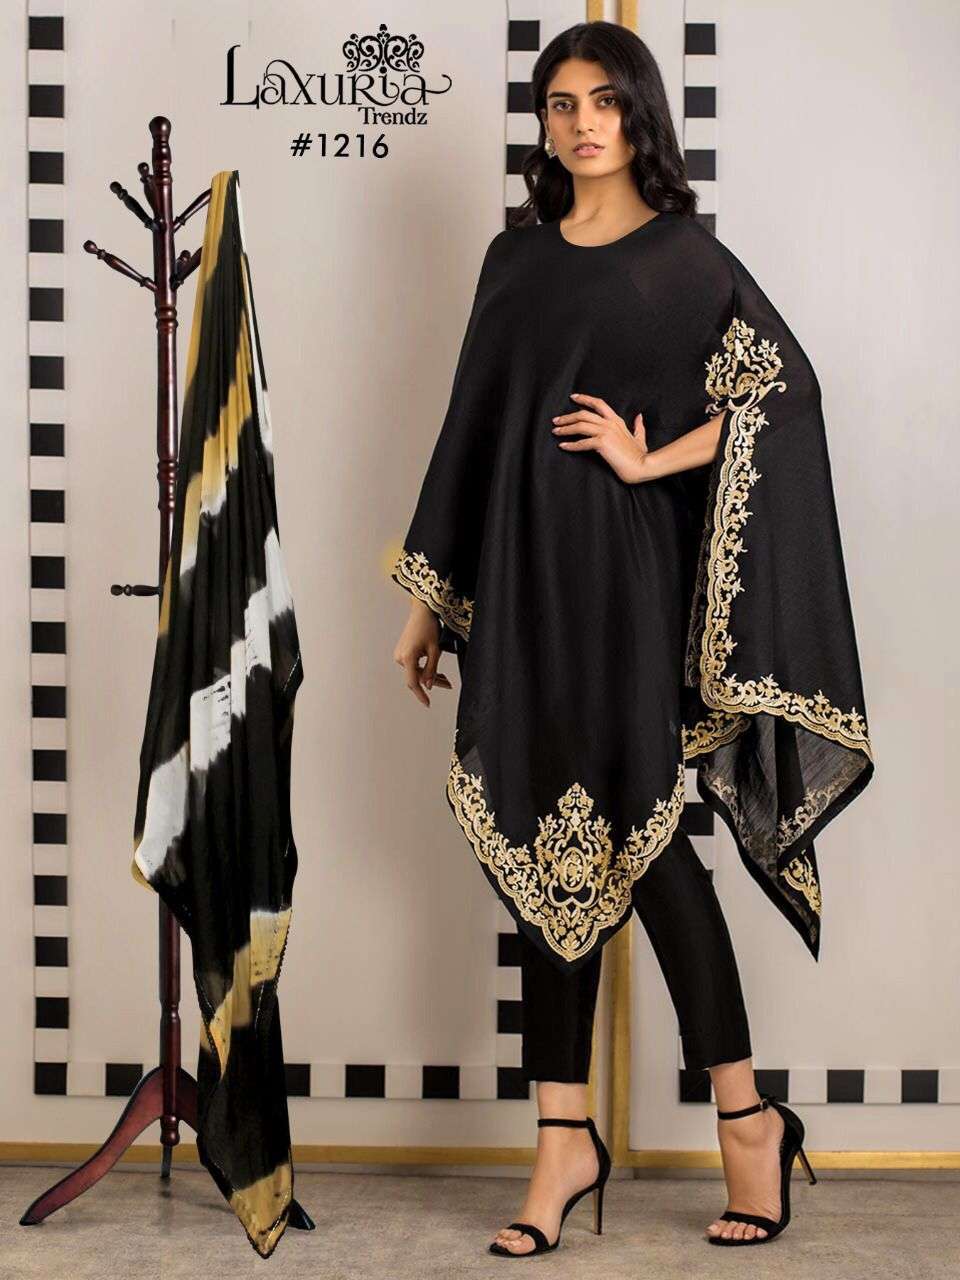 New Kaftan Launch Embroidered Shirt With Pant n Siburi Duptta By laxuria trendz design no 1216 full black kaftan suit readymade